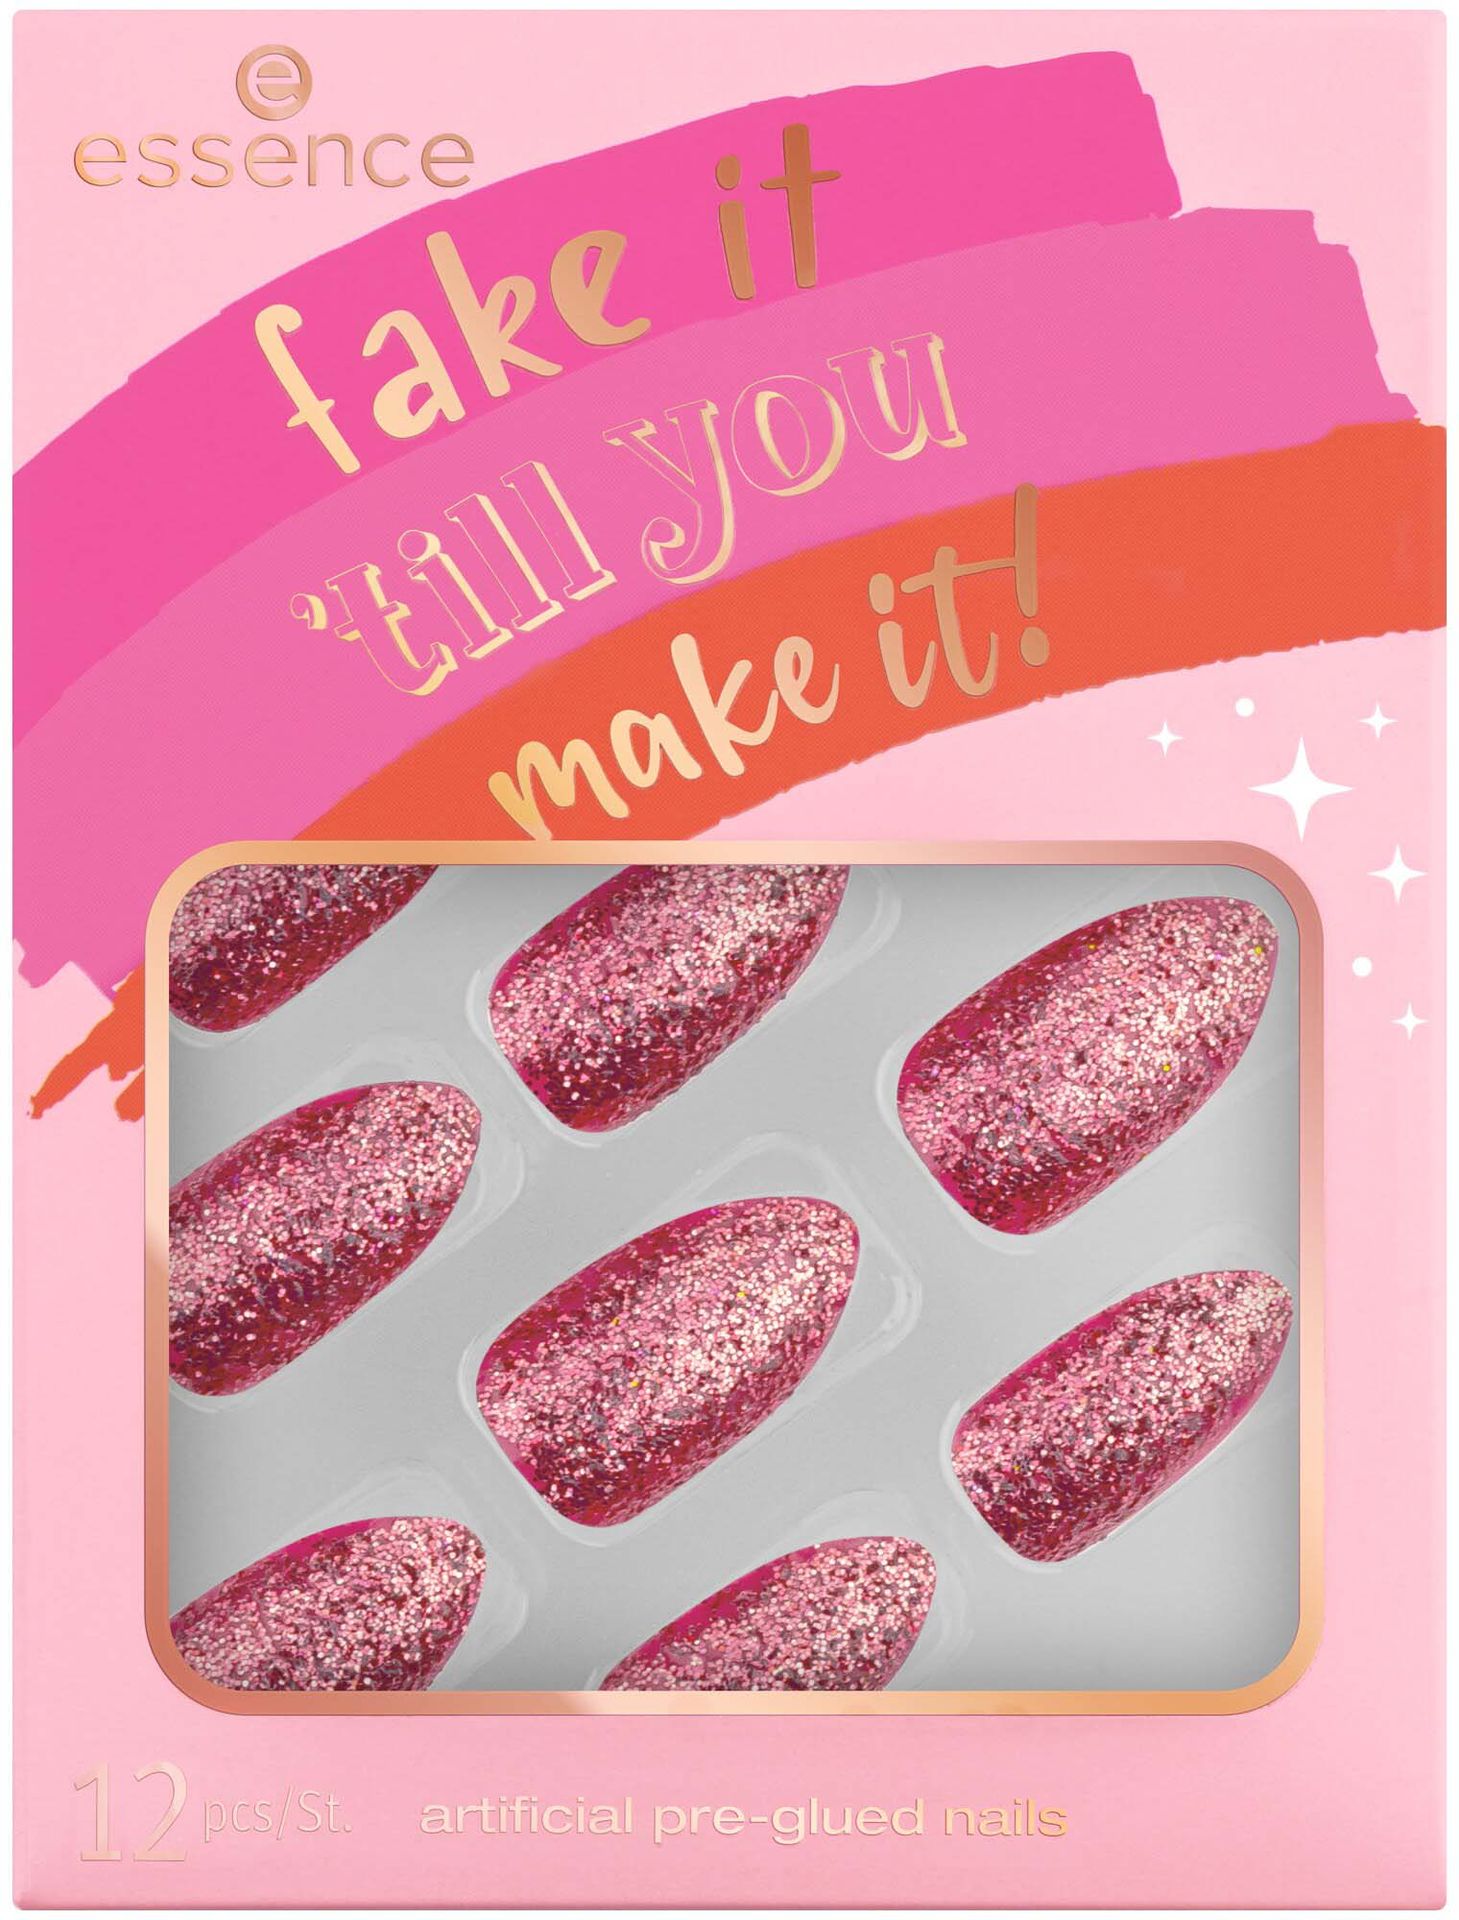 essence essence Fake It 'Till You Make It! Artificial Pre-Glued Nails 02 02 Glitter Is The New Black